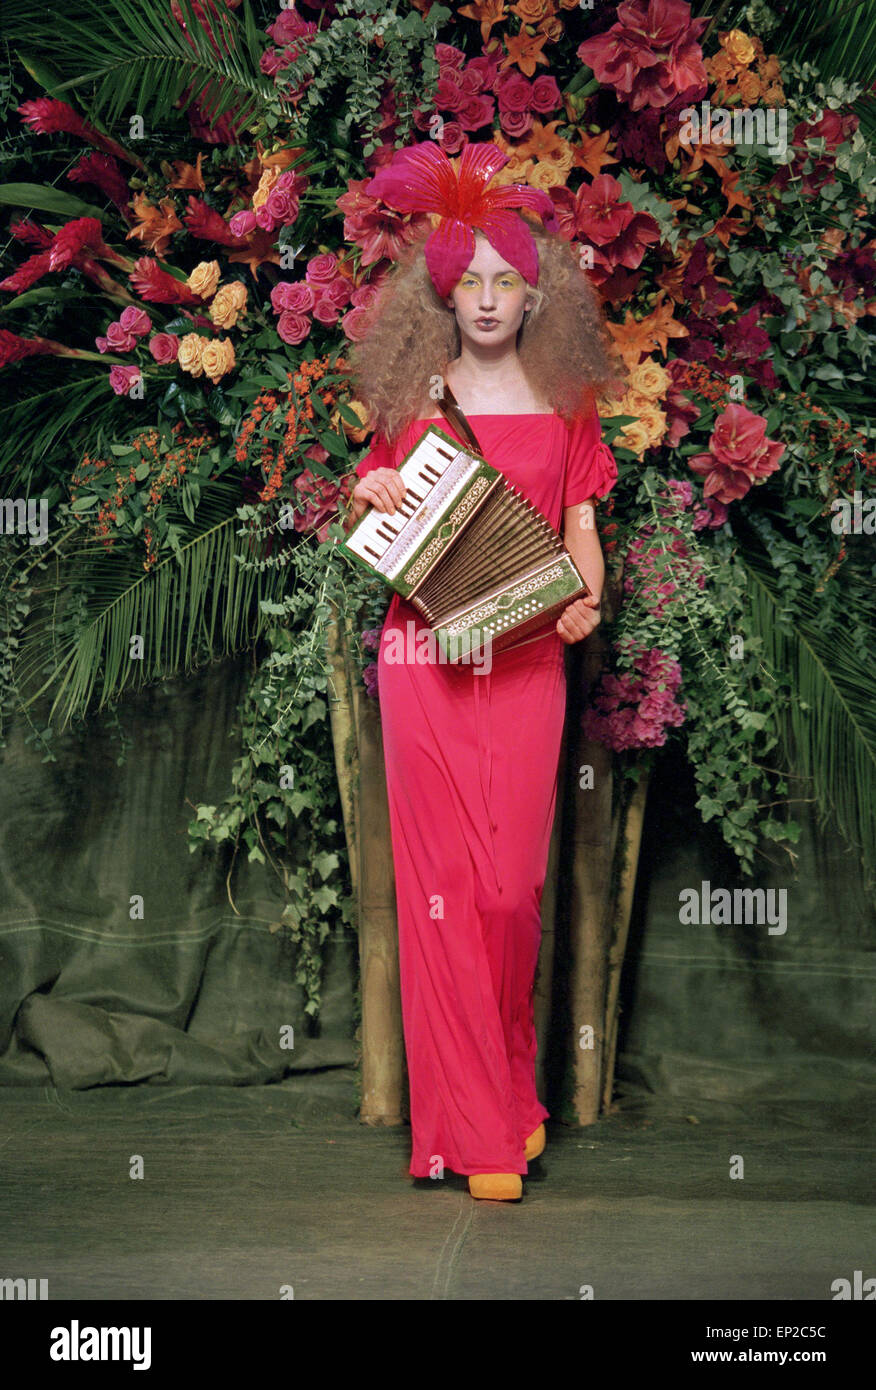 Elizabeth Jagger, daughter of Mick Jagger and Jerry Hall, wearing a hot fuchsia pink dress with an oversized orchid in her hair as she makes her London catwalk debut at the Vivienne Westwood Red Label show for London Fashion Week. 27th September 1998. Stock Photo